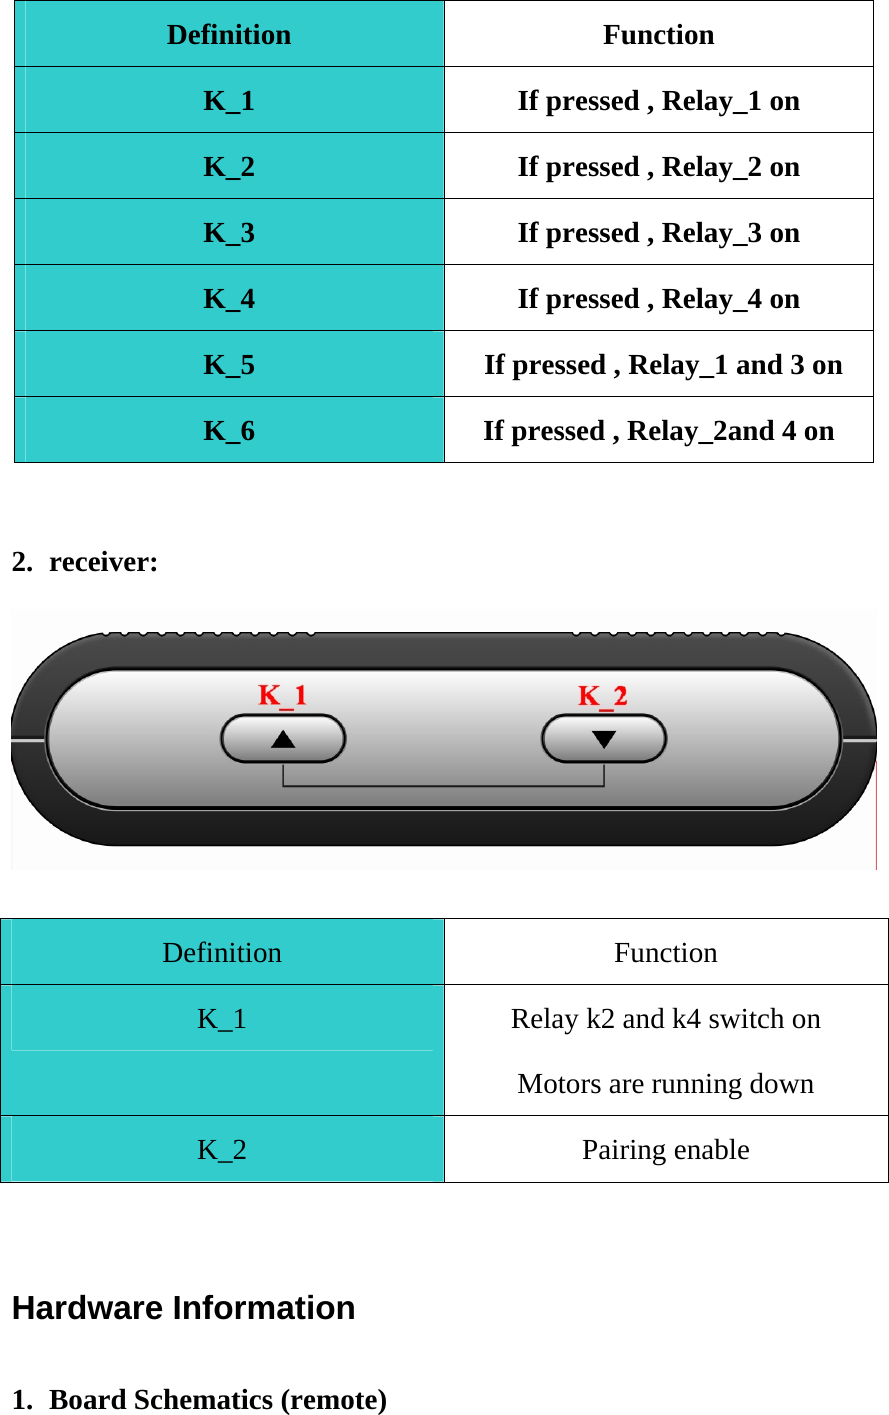 Definition Function K_1  If pressed , Relay_1 on K_2  If pressed , Relay_2 on K_3  If pressed , Relay_3 on K_4  If pressed , Relay_4 on K_5  If pressed , Relay_1 and 3 on K_6  If pressed , Relay_2and 4 on  2. receiver:   Definition Function K_1  Relay k2 and k4 switch on Motors are running down K_2 Pairing enable  Hardware Information 1. Board Schematics (remote) 